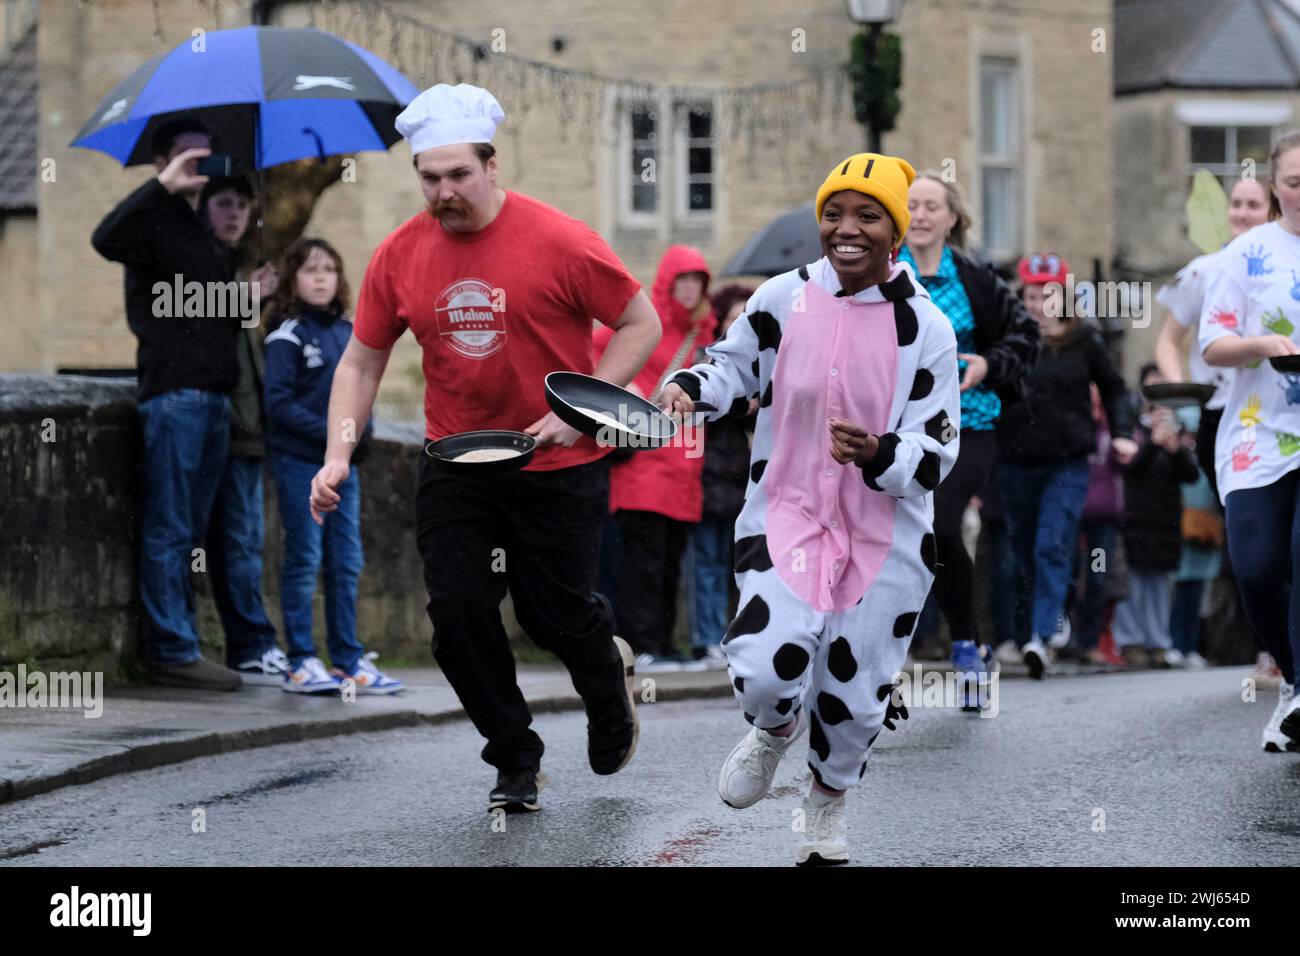 Bradford-on Avon, Wiltshire, UK. 13th Feb, 2024. The annual pancake race along the town bridge in Wiltshire's historic Bradford-on-Avon. The main road is closed for a few minutes each Shrove Tuesday for this traditional light-hearted race; the route is over the Bridge and back again. Each pancake must be tossed at least three times along the route, otherwise the competitor is disqualified. Shrove Tuesday is a Christian Feast Day before the start of Lent, an opportunity to use up fats and sugars before fasting. Credit: JMF News/Alamy Live News Stock Photo